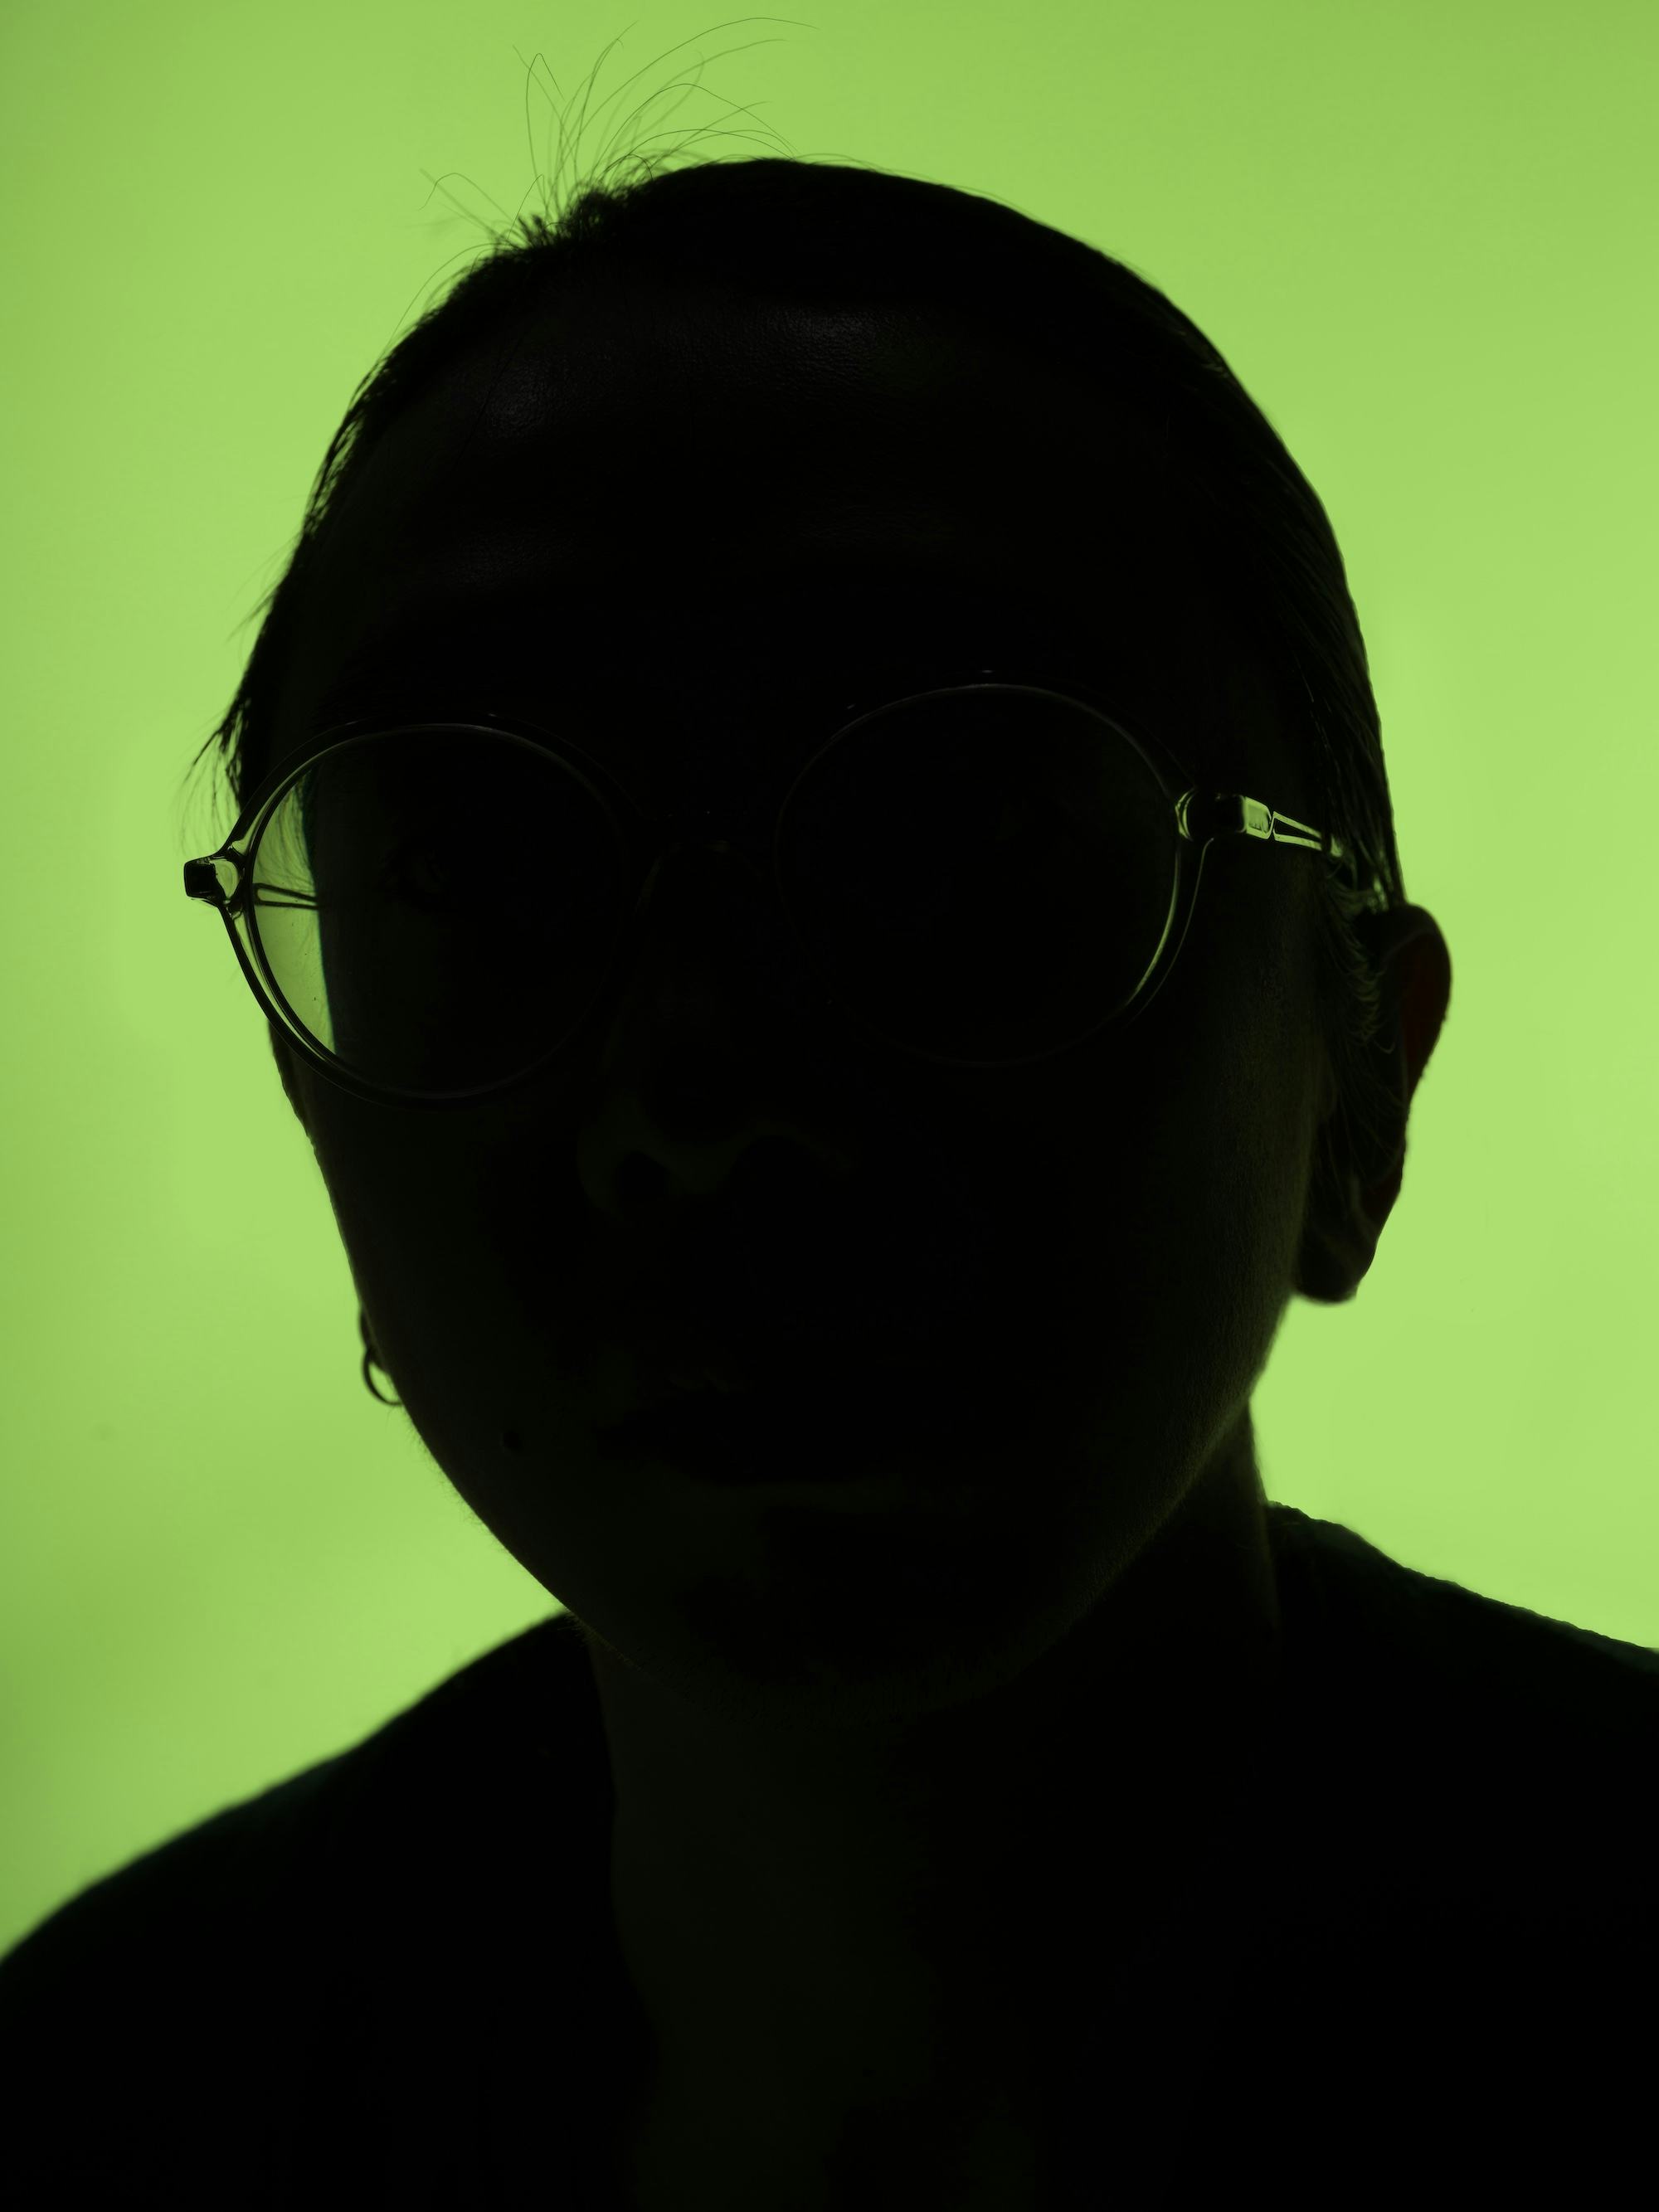 Self portrait of the artist, only showing the outline of the face in front of a green background. © Sheung Yiu